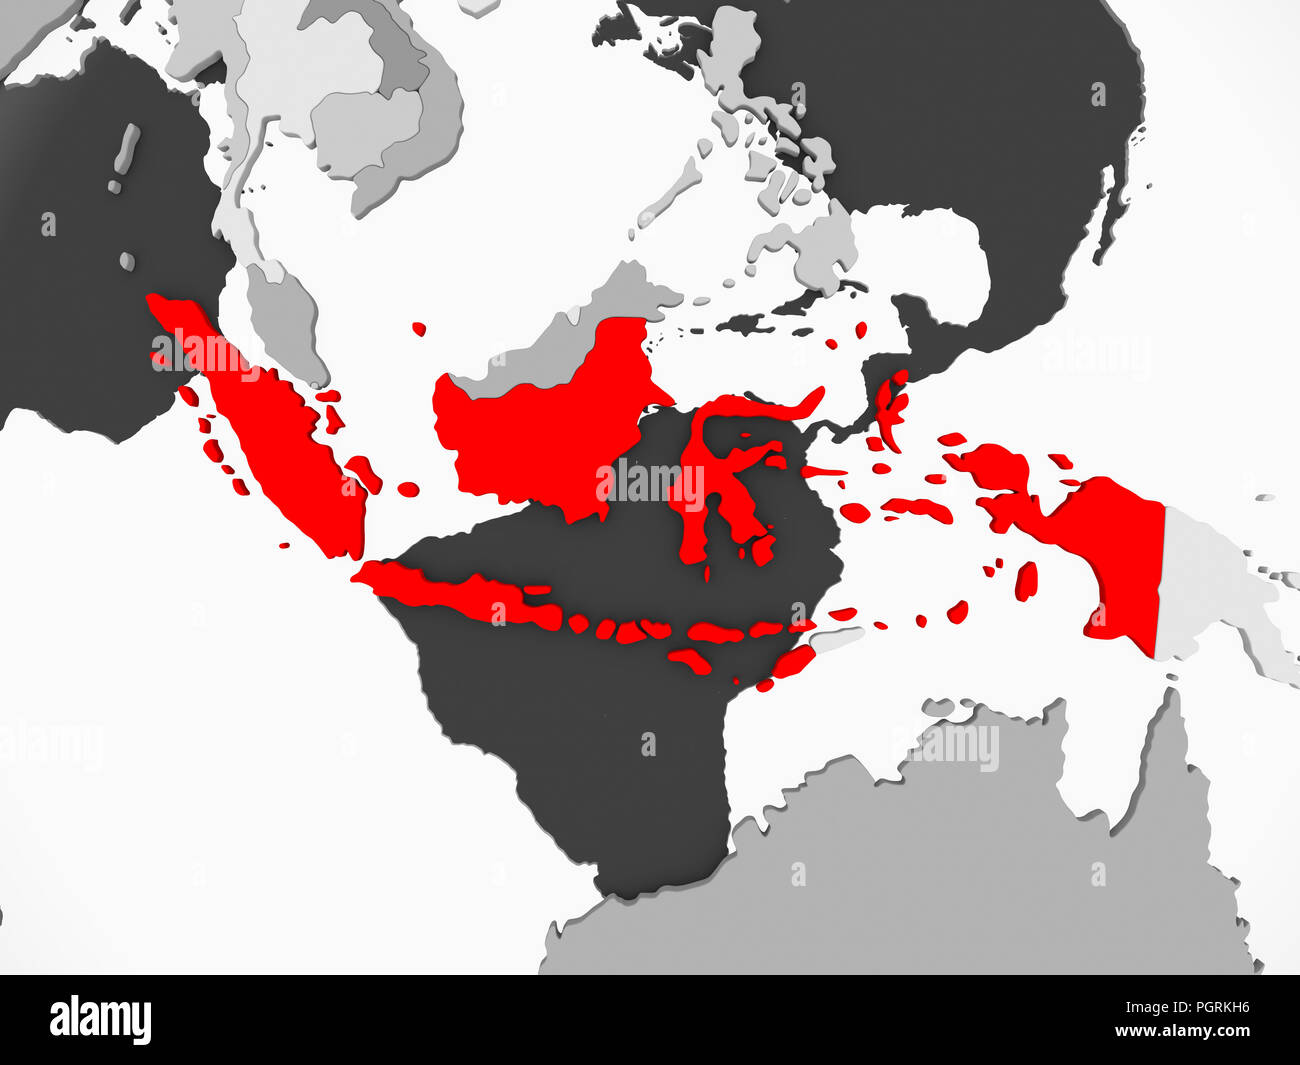 Indonesia in red on grey political map with transparent oceans. 3D illustration. Stock Photo